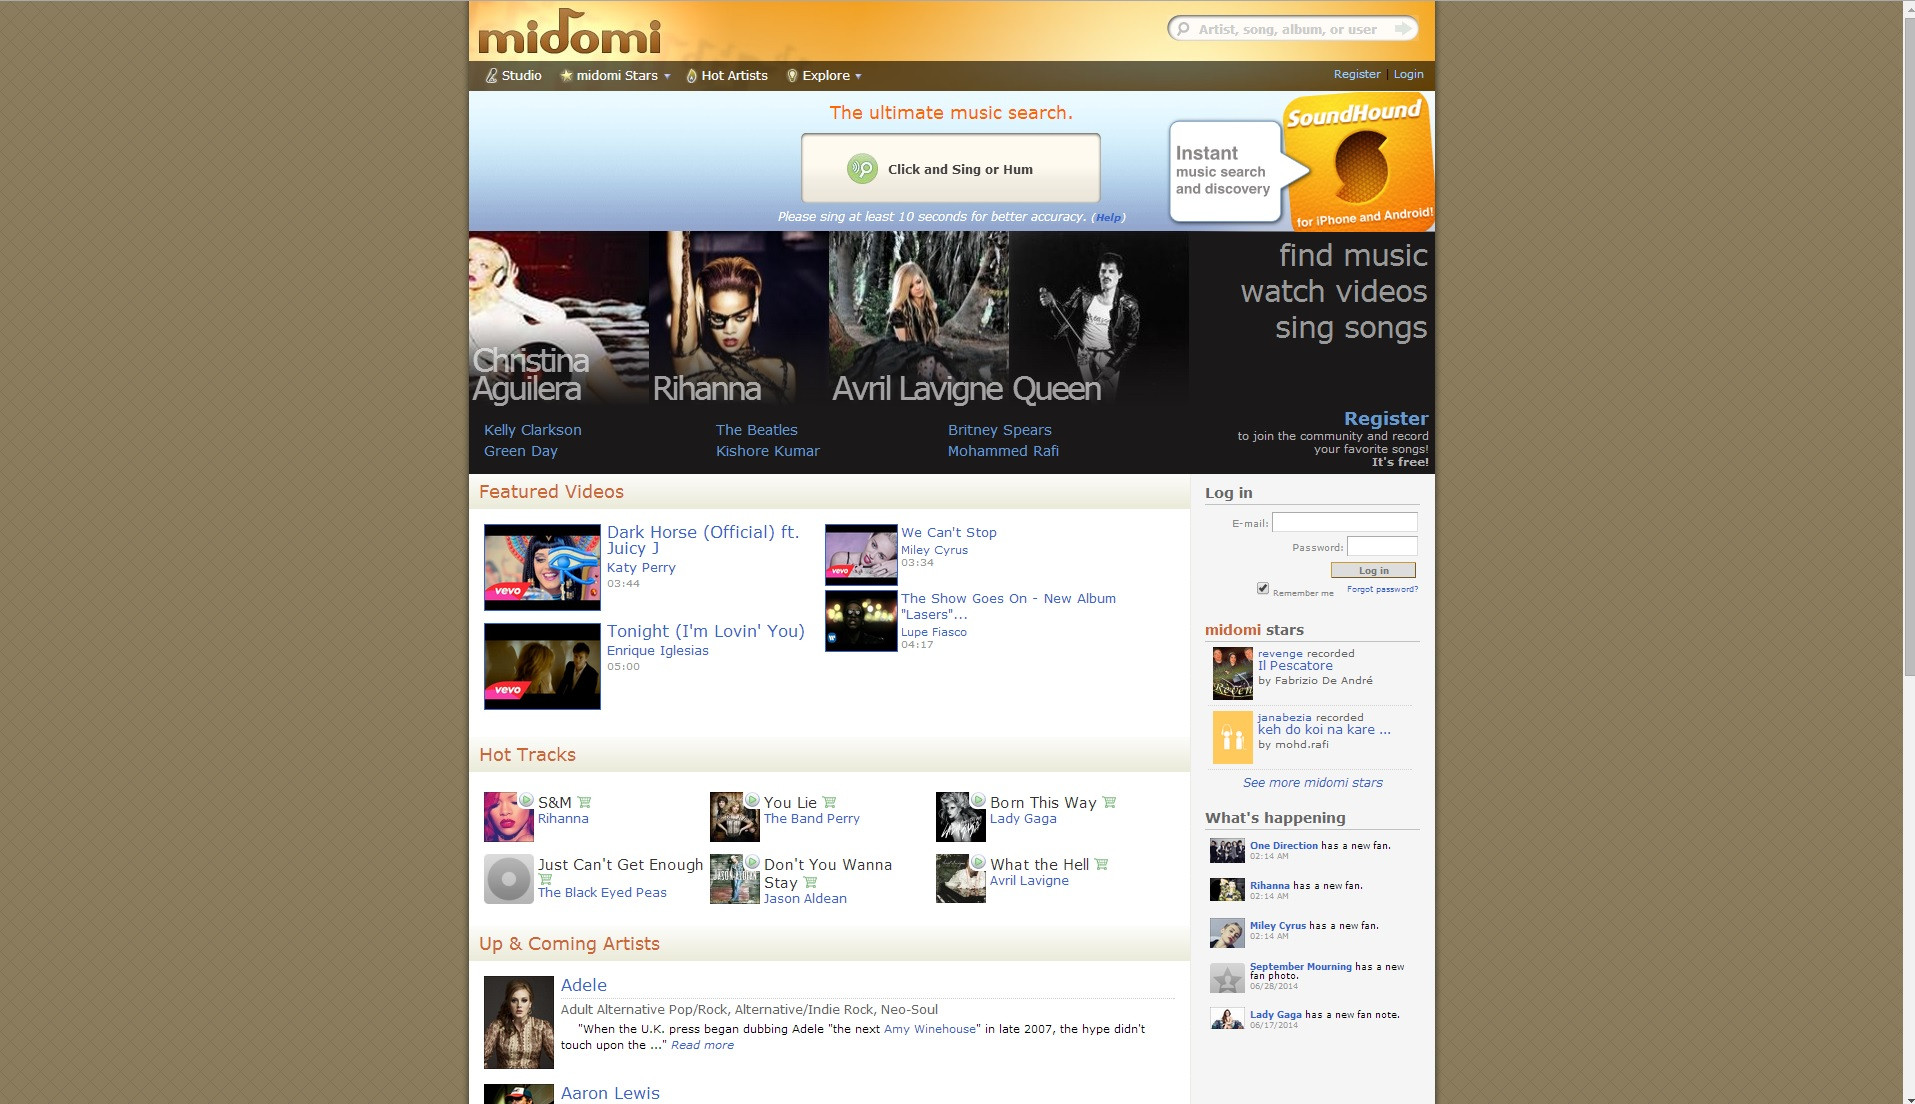 <a href="http://www.midomi.com" target="_blank">midomi.com</a> - Search for music using your voice by singing or humming.